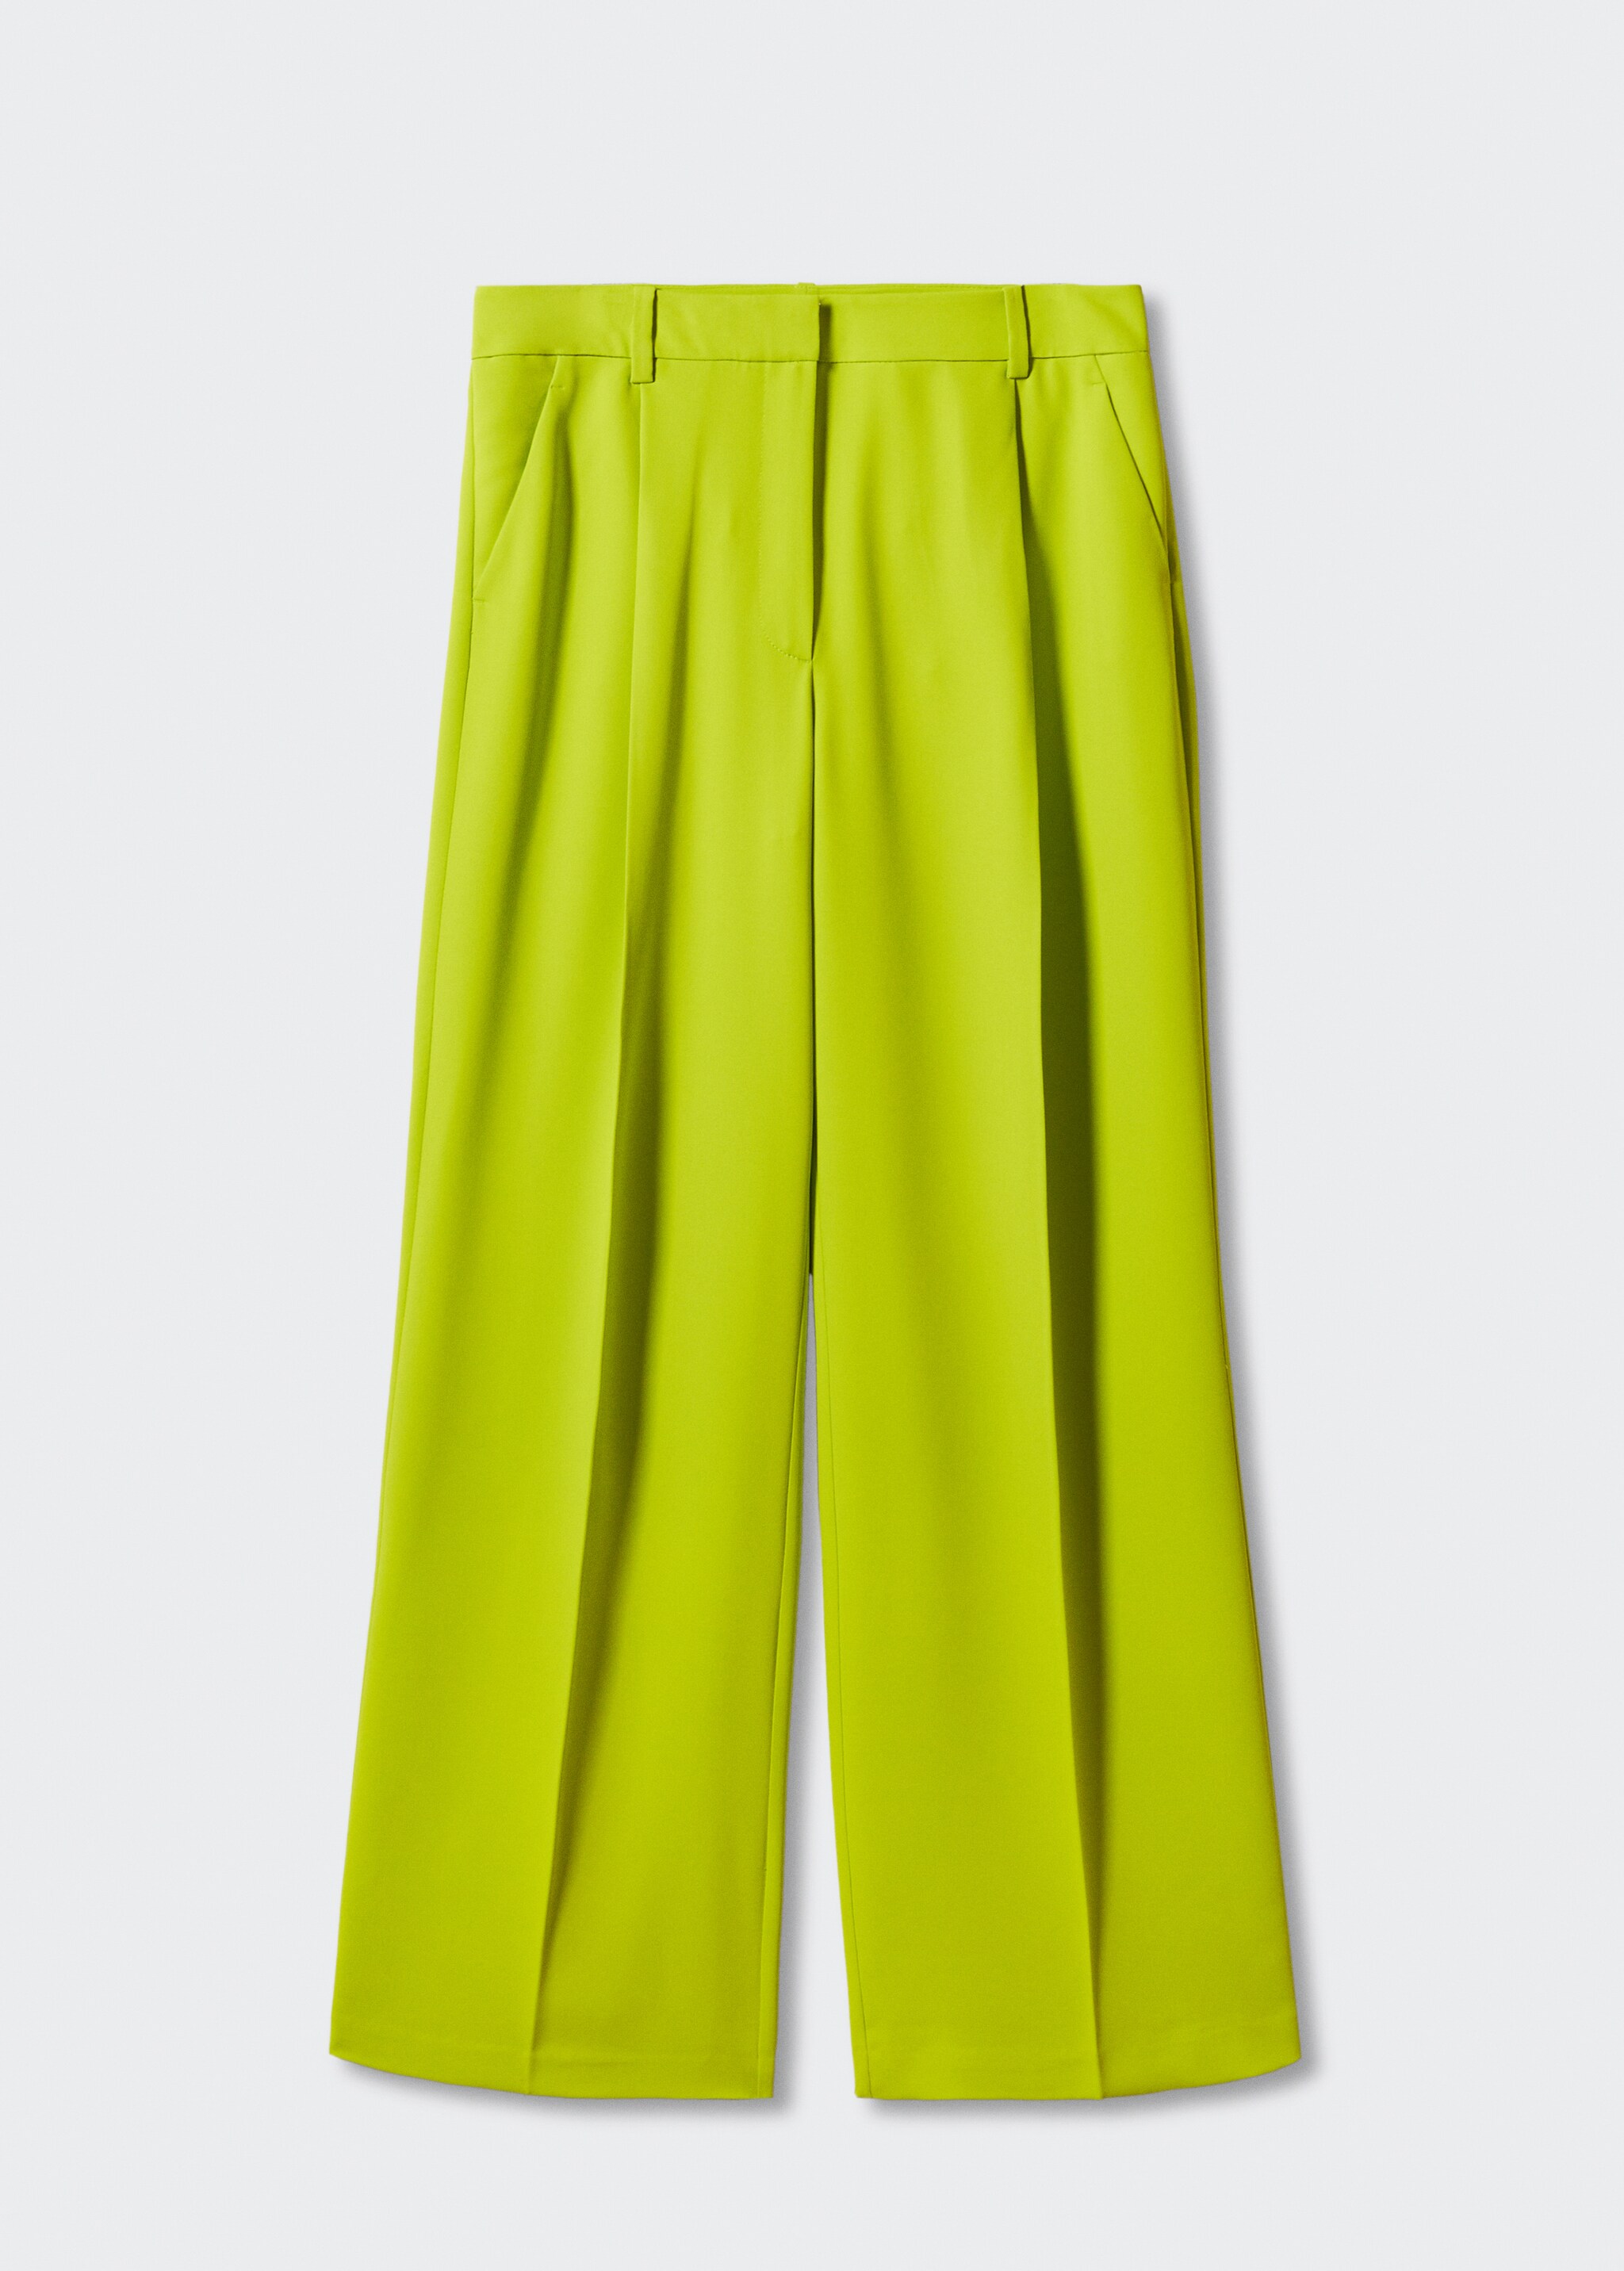 Dart palazzo trousers - Article without model